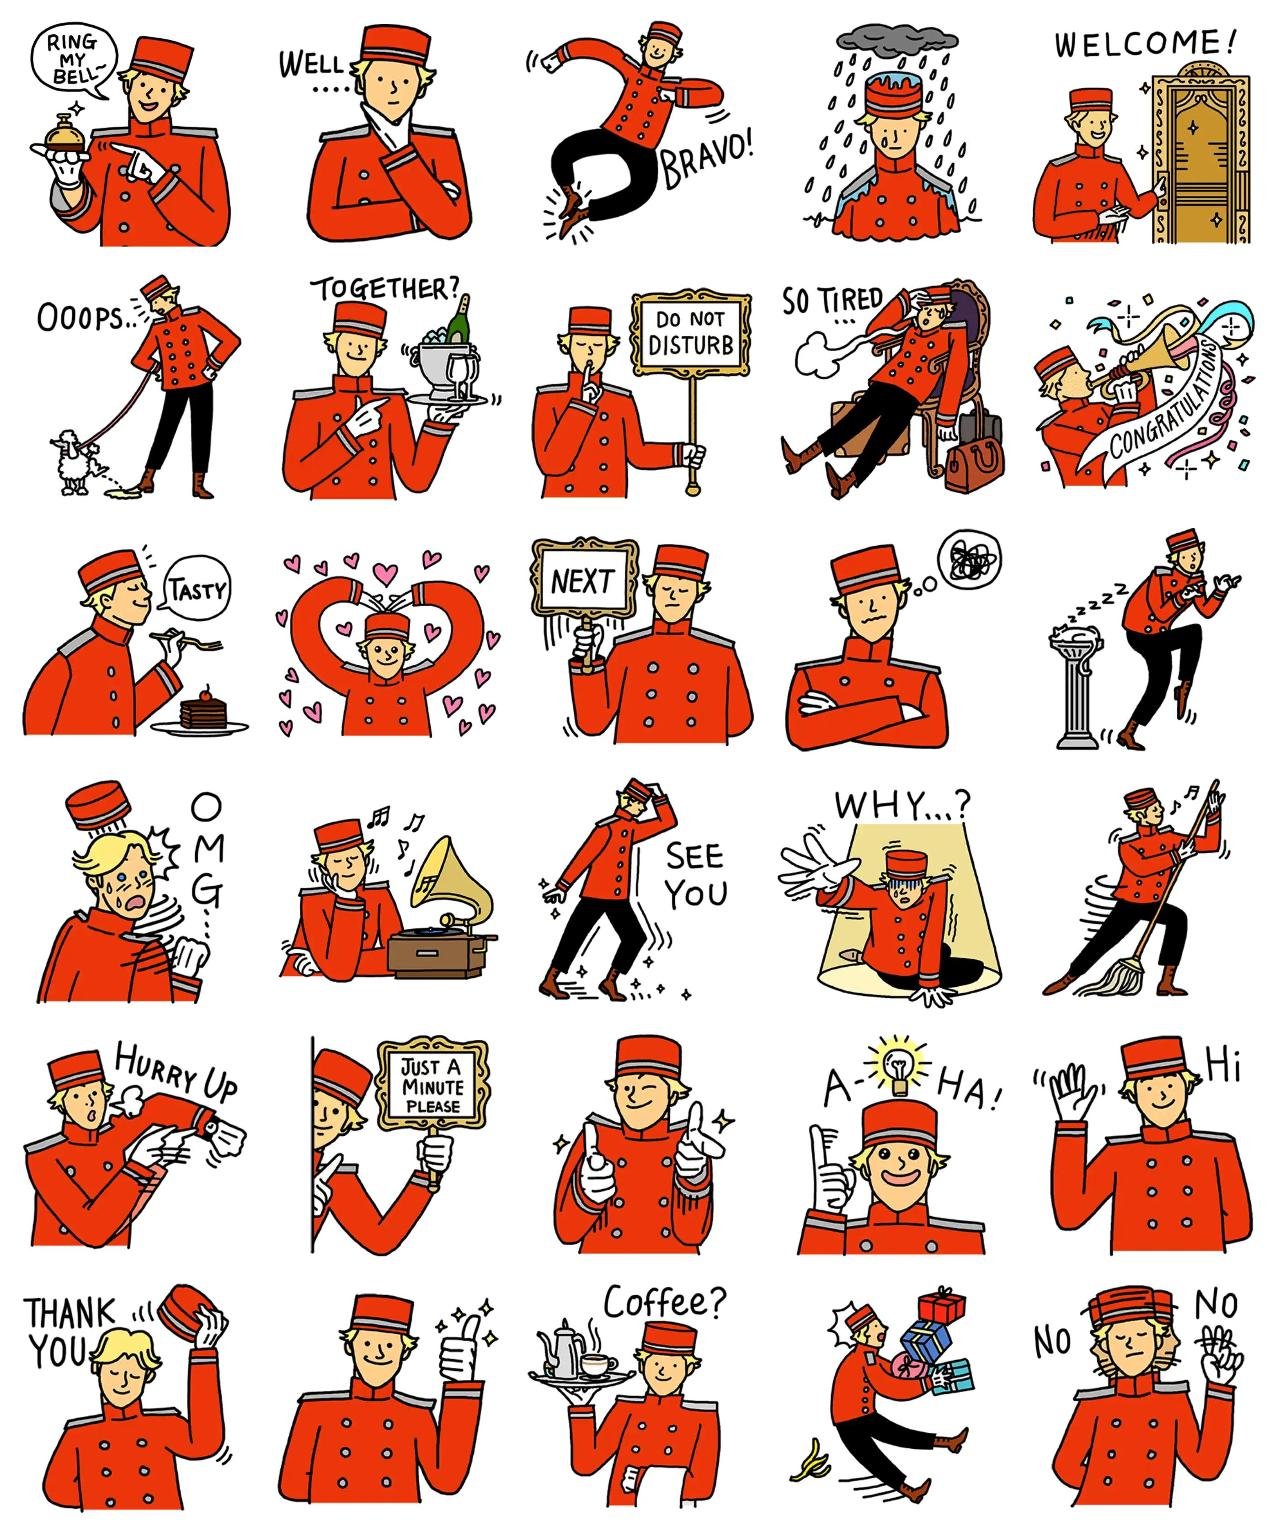 Bellboy Joseph Gag,Romance sticker pack for Whatsapp, Telegram, Signal, and others chatting and message apps